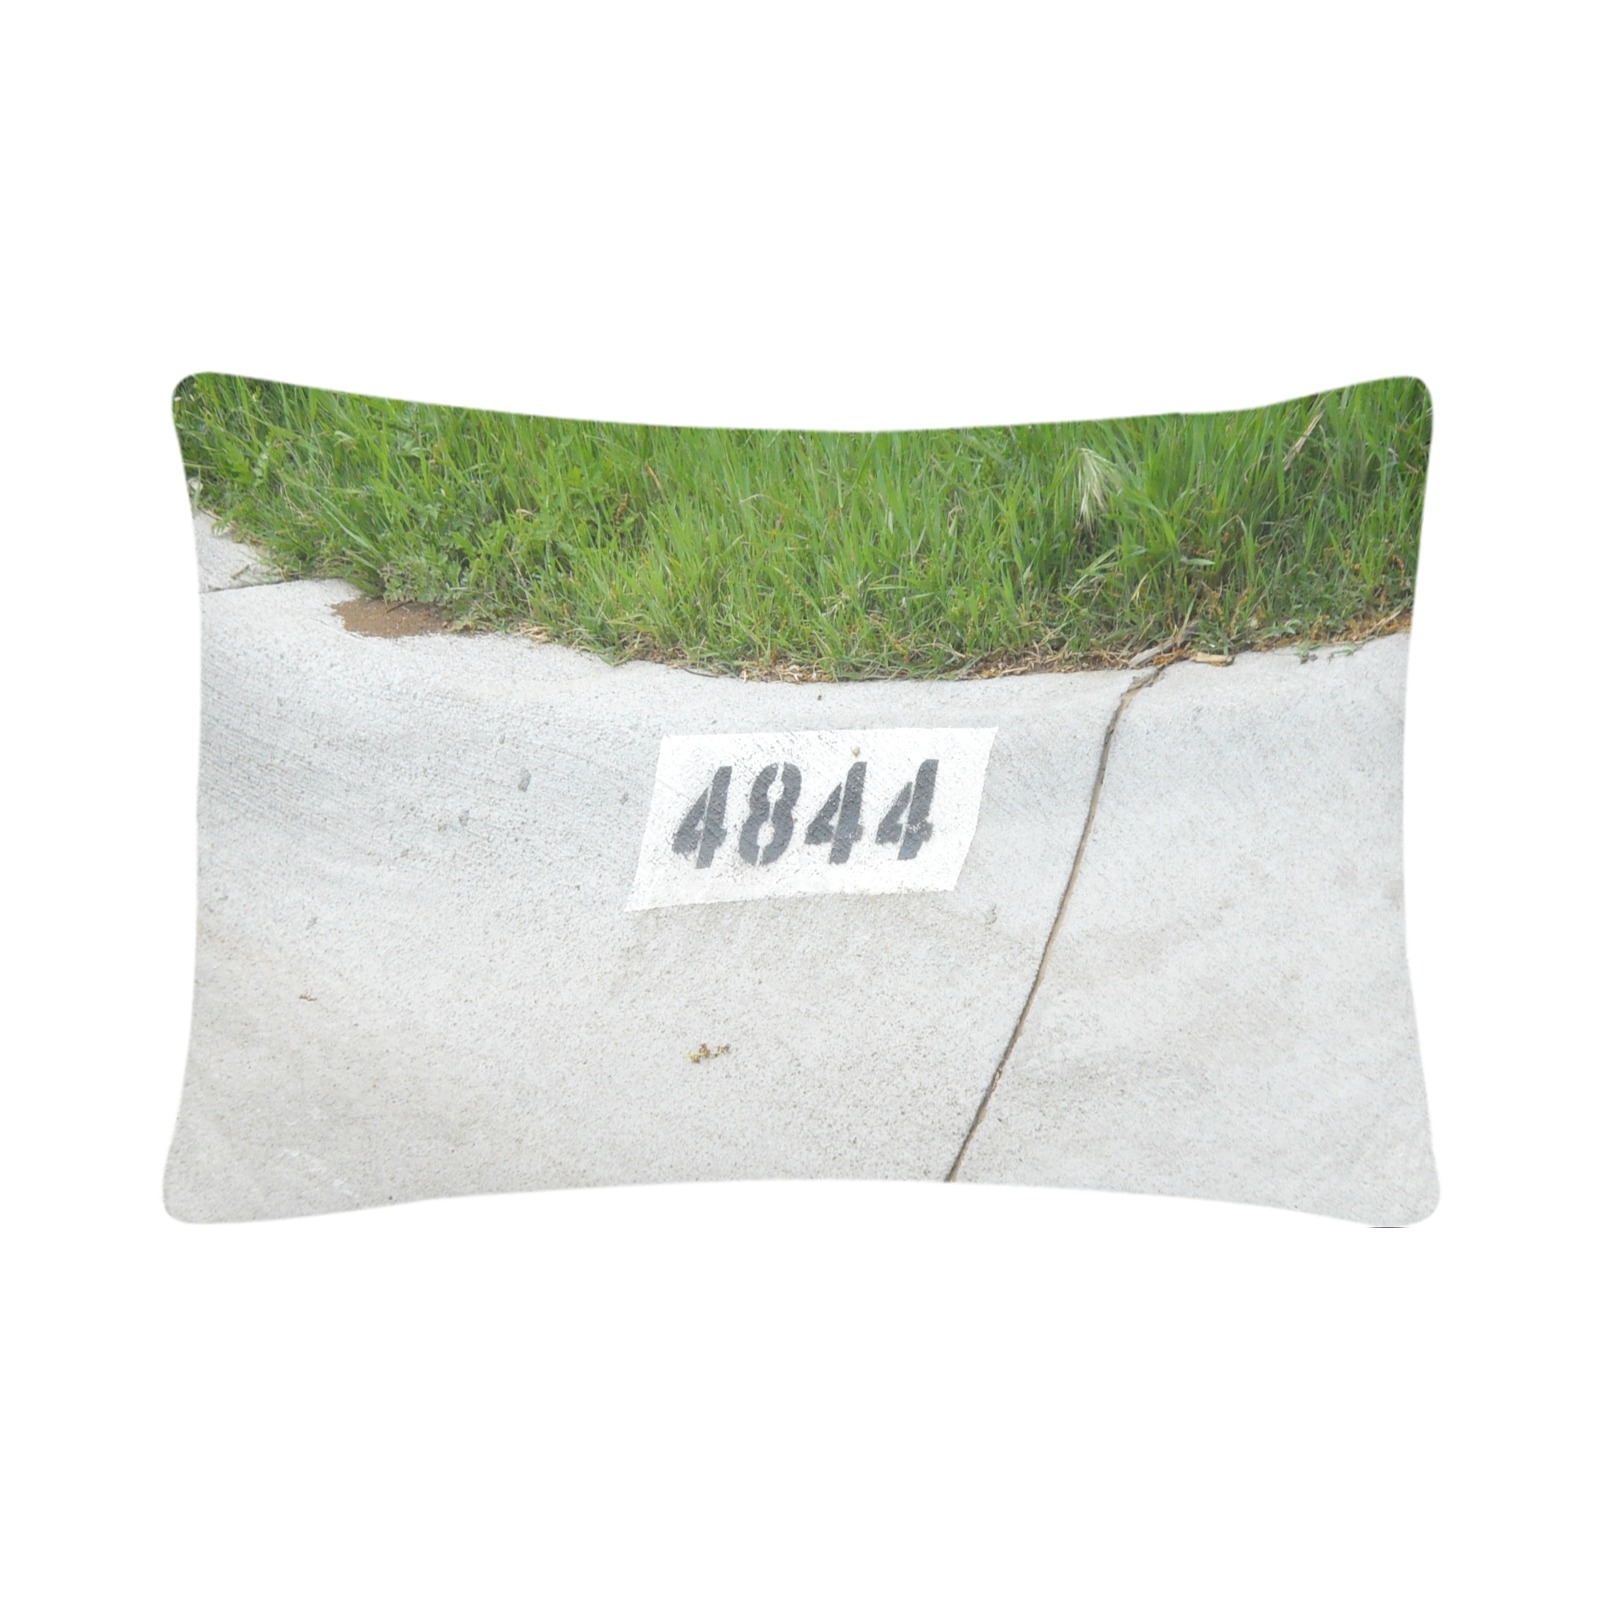 Street Number 4844 Custom Pillow Case 20"x 30" (One Side) (Set of 2)